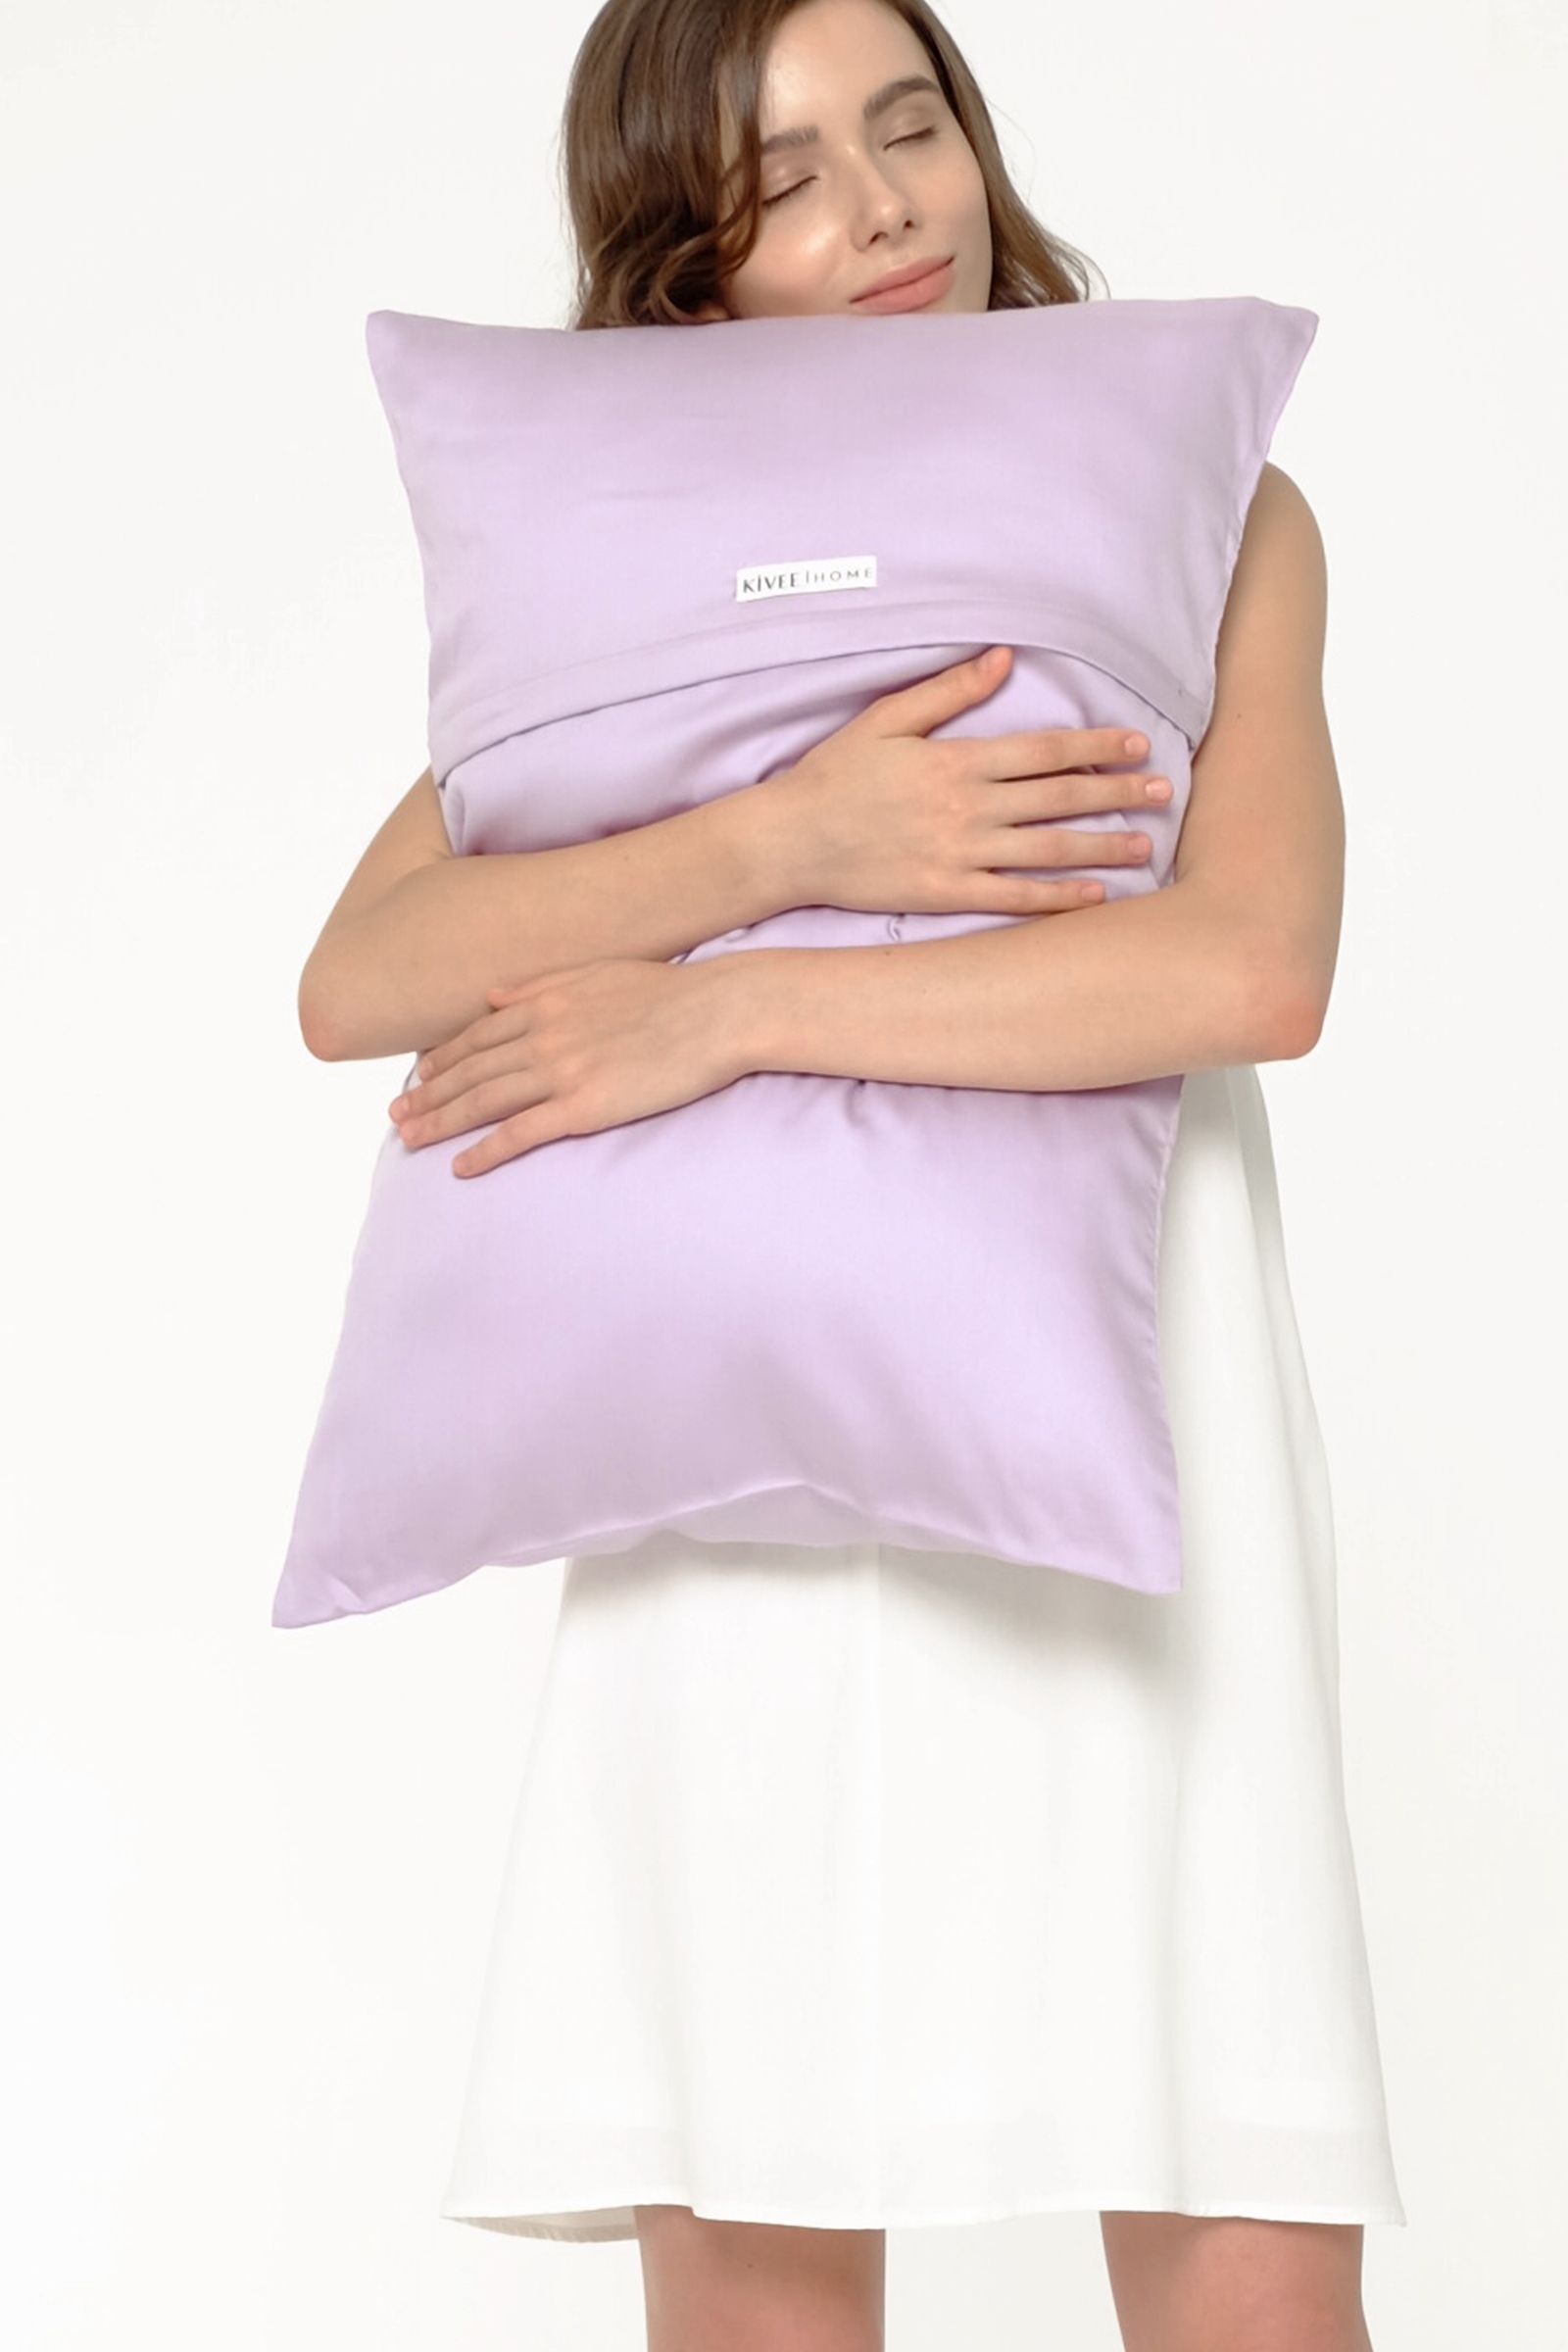 Picture of KIVEE X OSC SWEET DREAMS PILLOW SOFT LILAC 